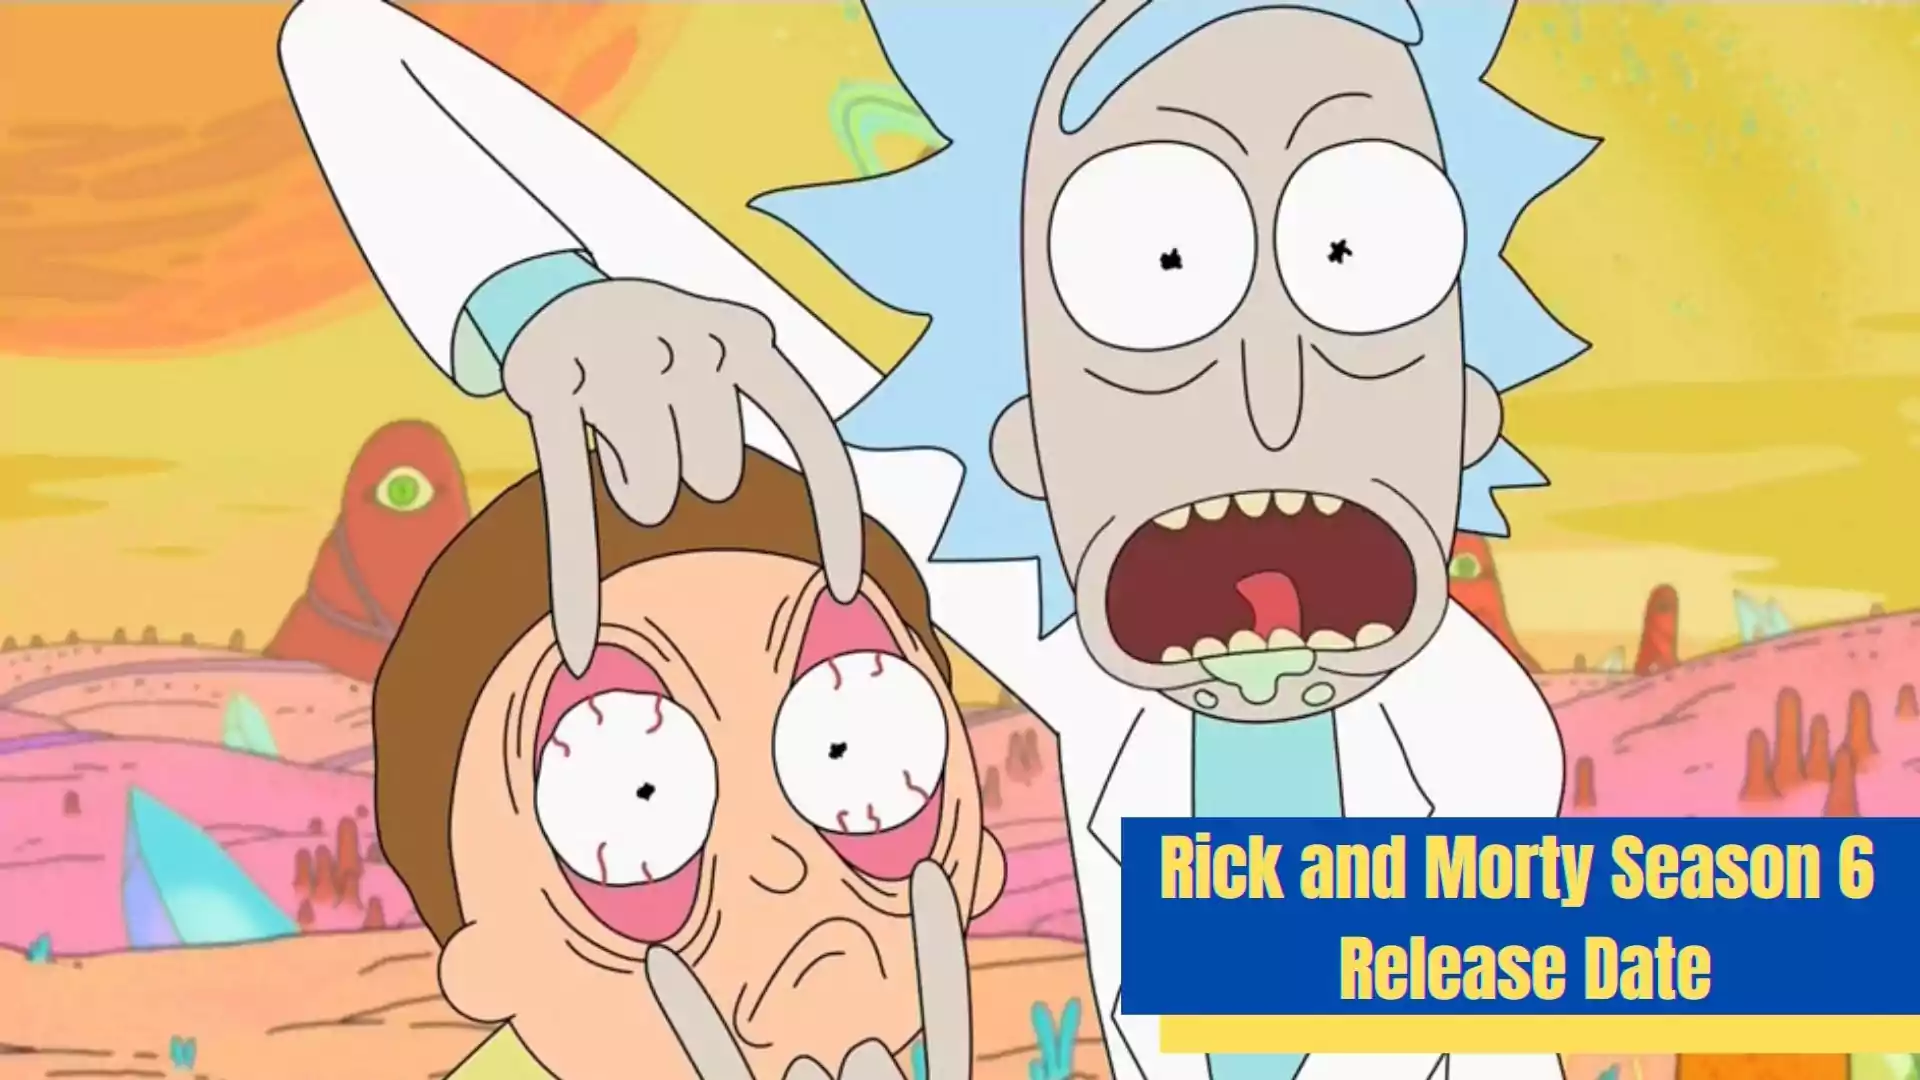 Rick and Morty Season 6 Release Date